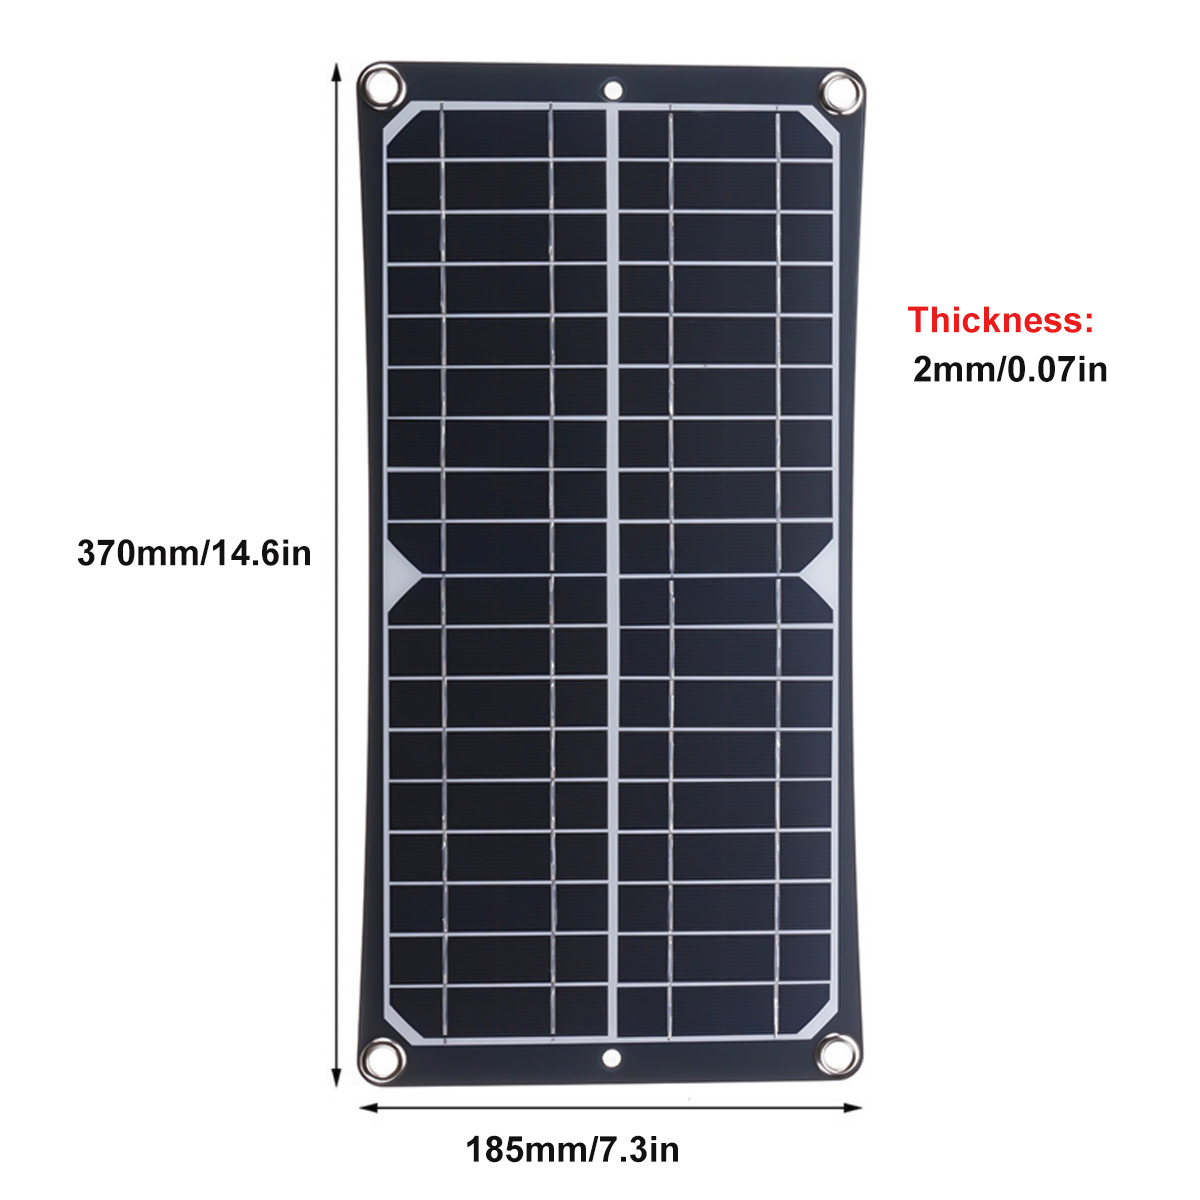 100W-18V-Monocrystalline-Solar-Panel-Dual-USB-Portable-Battery-Charger-Car-RV-Boat-Portable-Charger--1856131-2